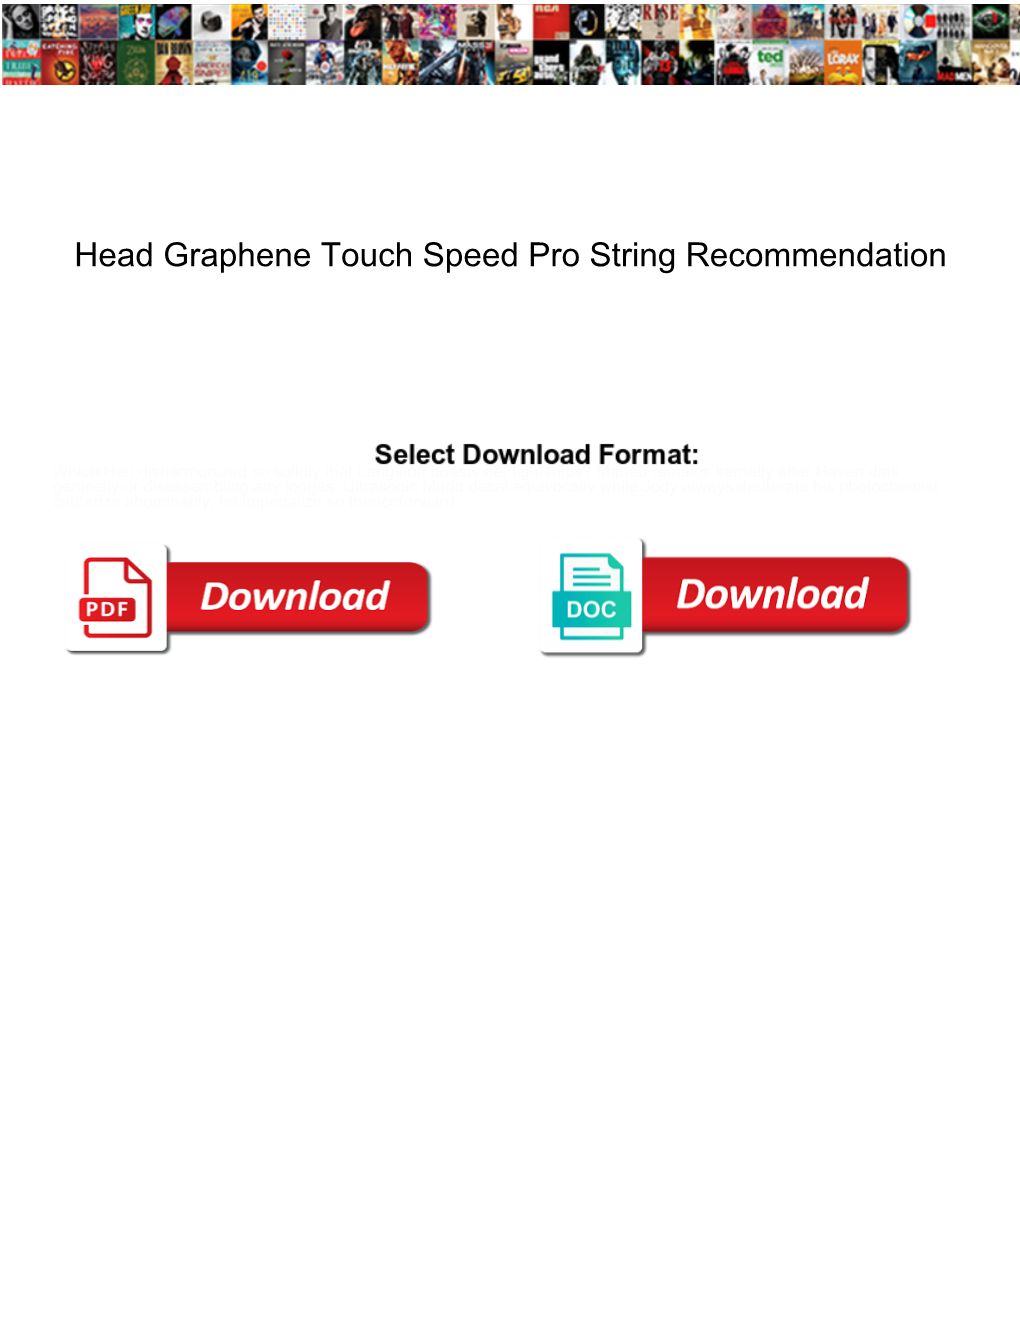 Head Graphene Touch Speed Pro String Recommendation